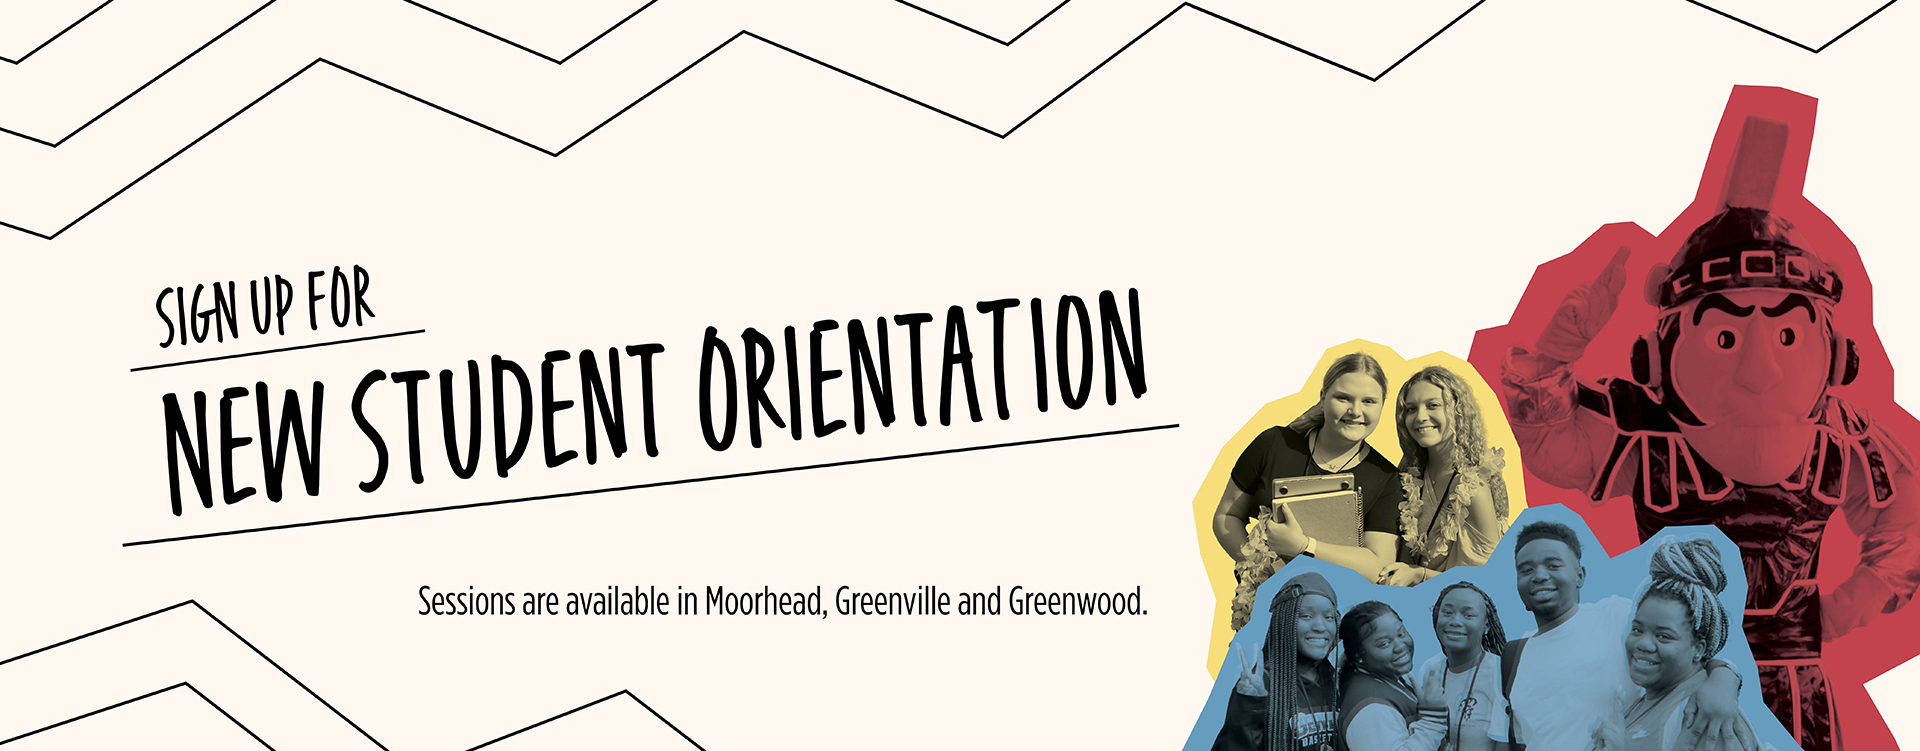 Sign Up for New Student Orientation